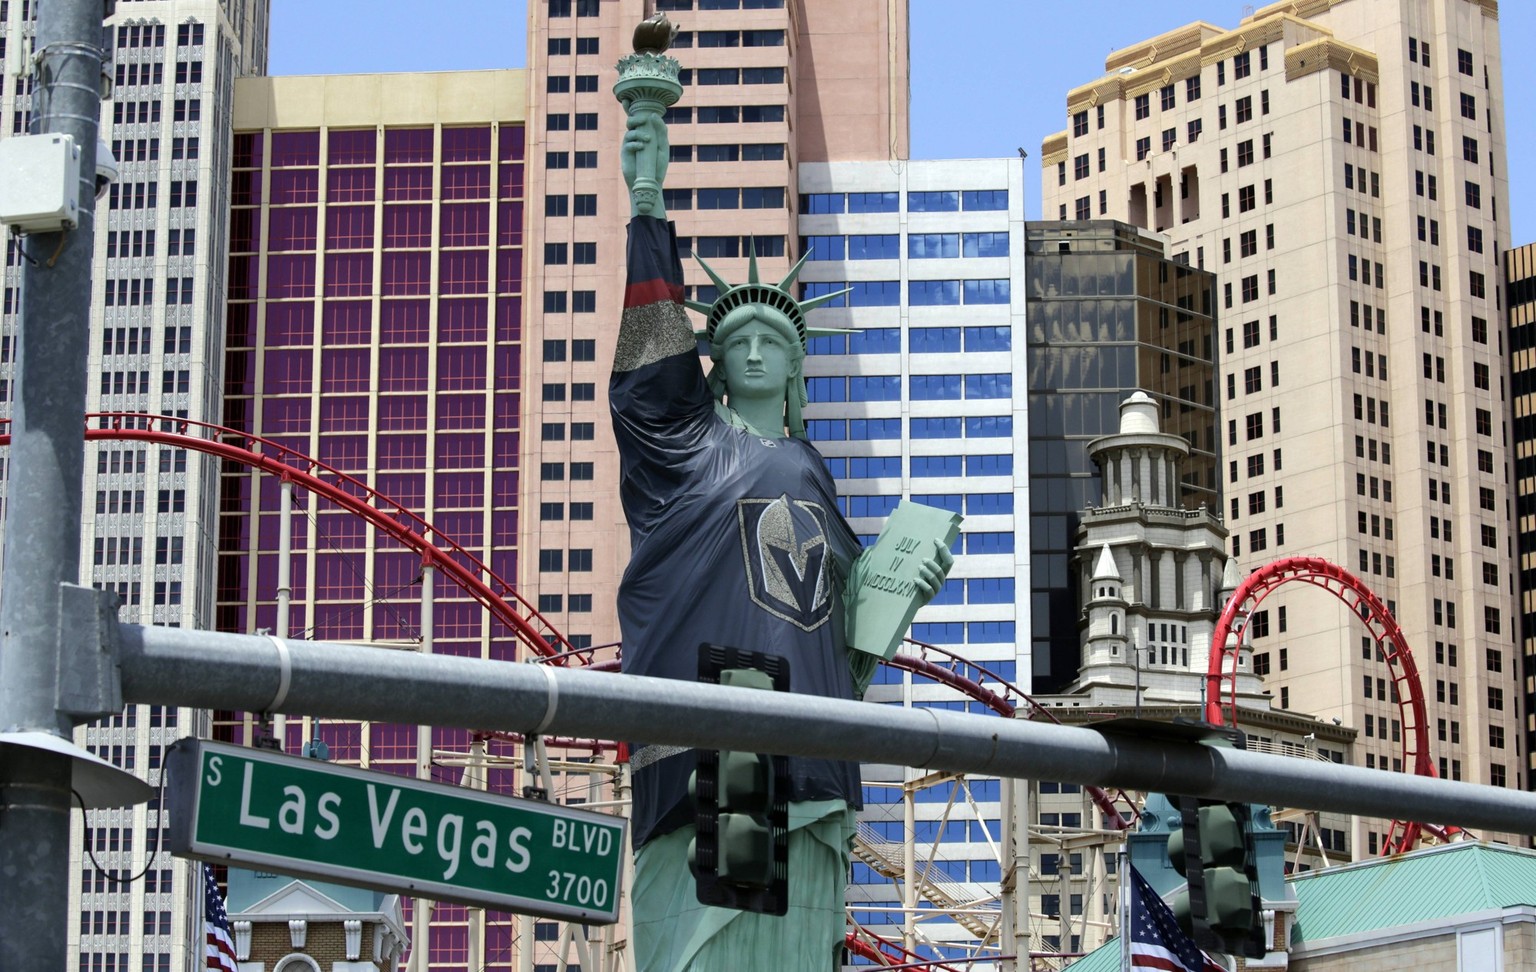 LAS VEGAS, NV - MAY 30: The Statue of Liberty outside of New York New York wearing a Golden Knights jersey prior to game 2 of the Stanley Cup Final between the Washington Capitals and the Las Vegas Go ...